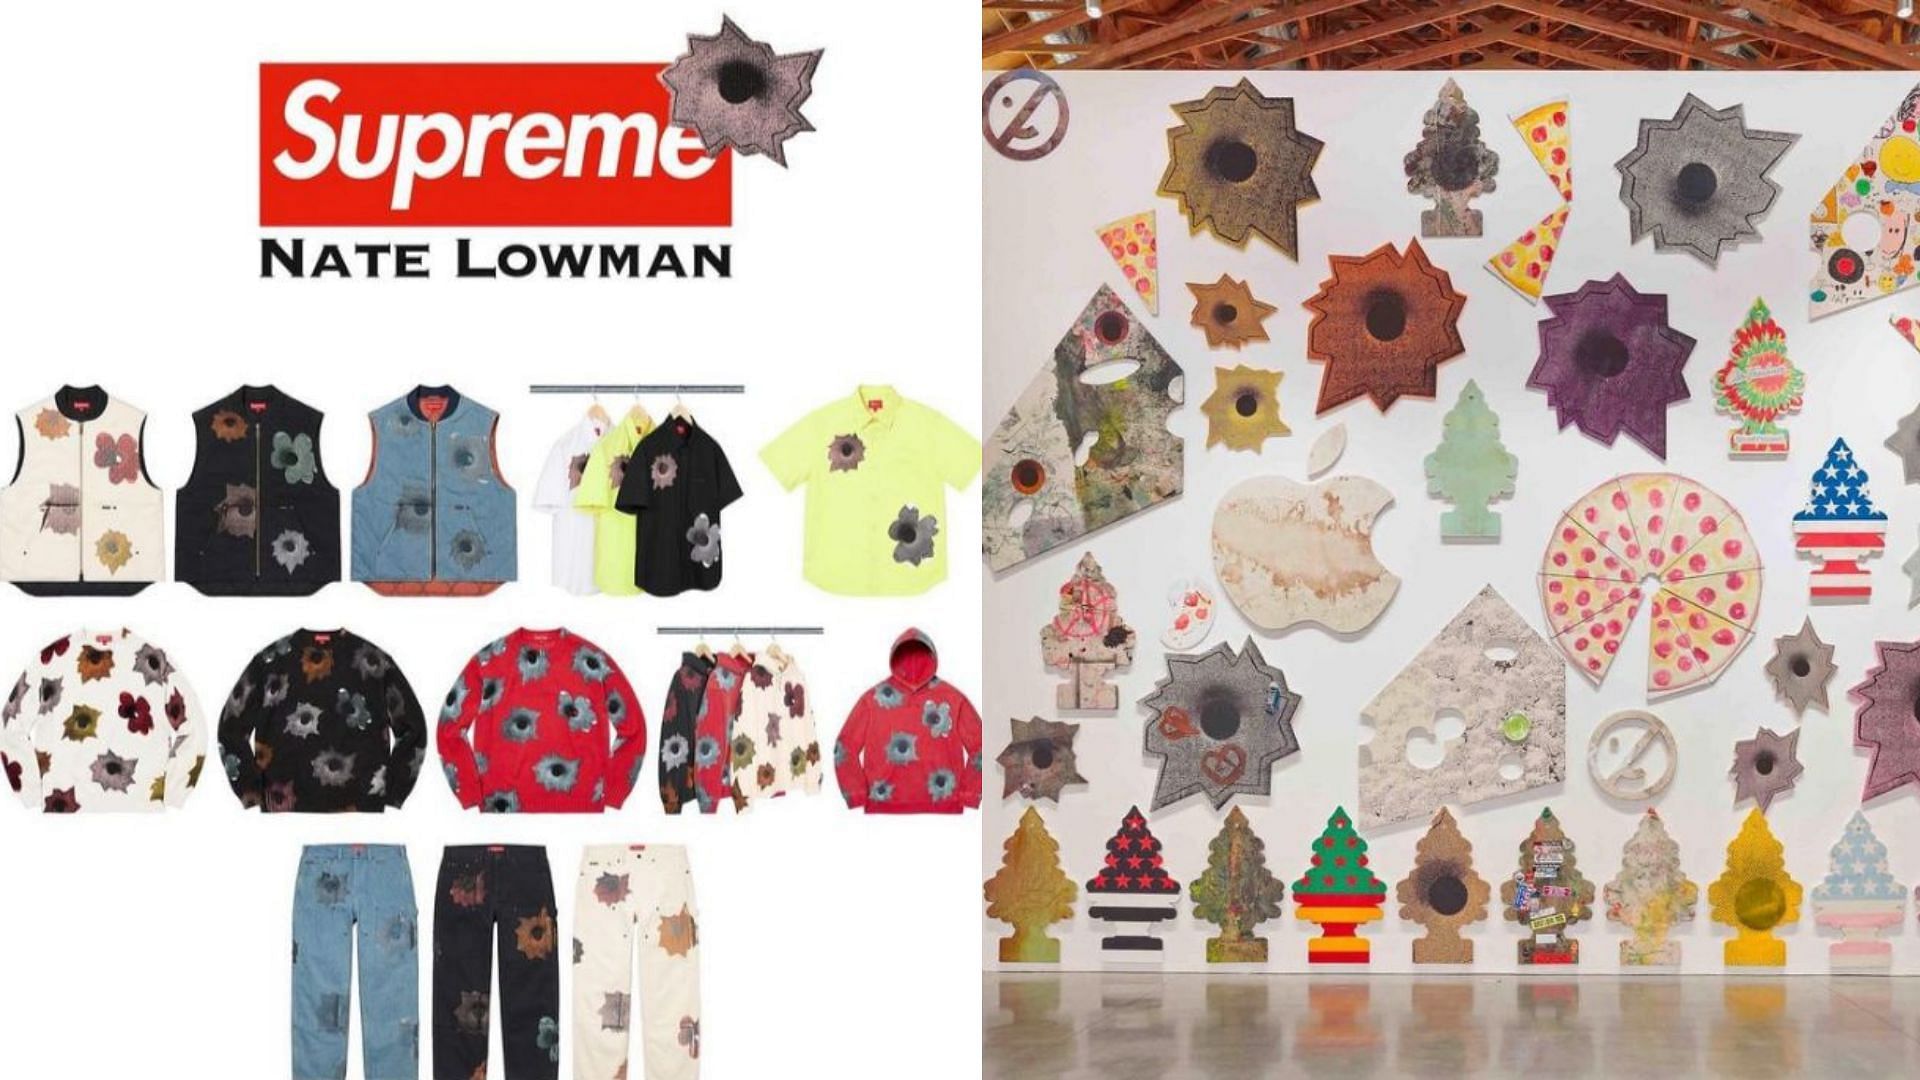 Nate Lowman x Supreme collab: Where to buy, release date, and more